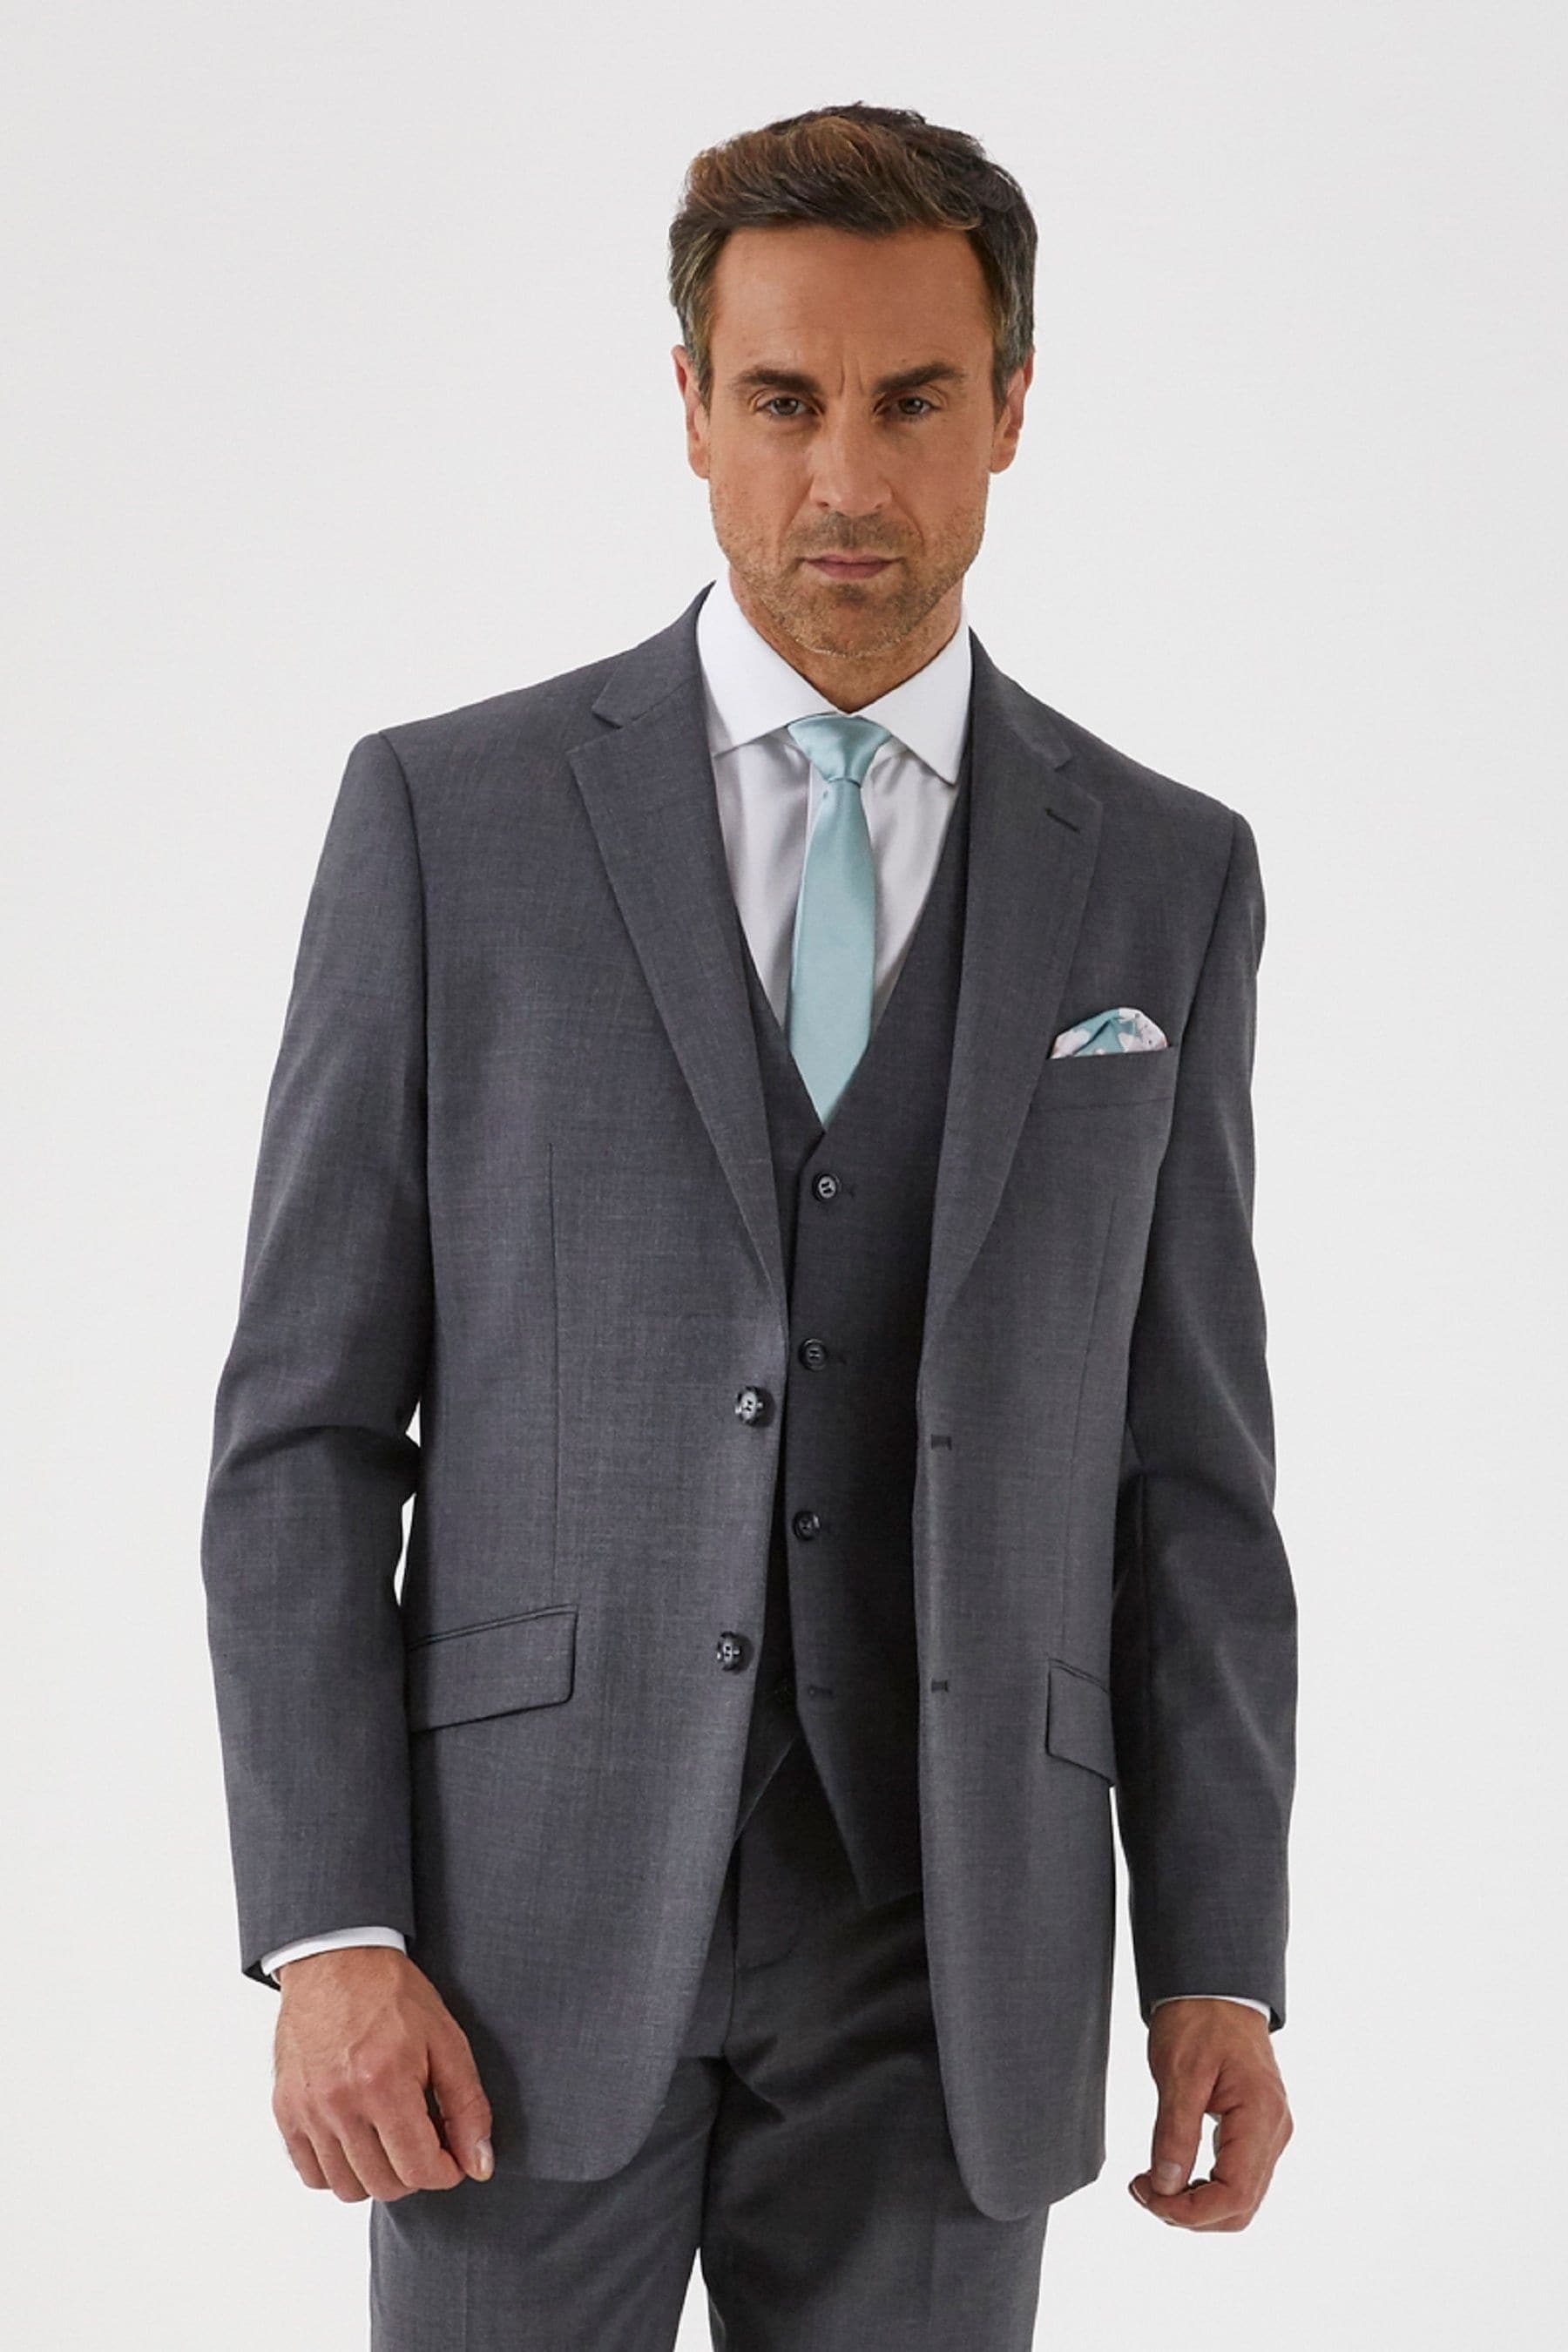 Buy Skopes Darwin Classic Fit Suit Jacket from the Next UK online shop